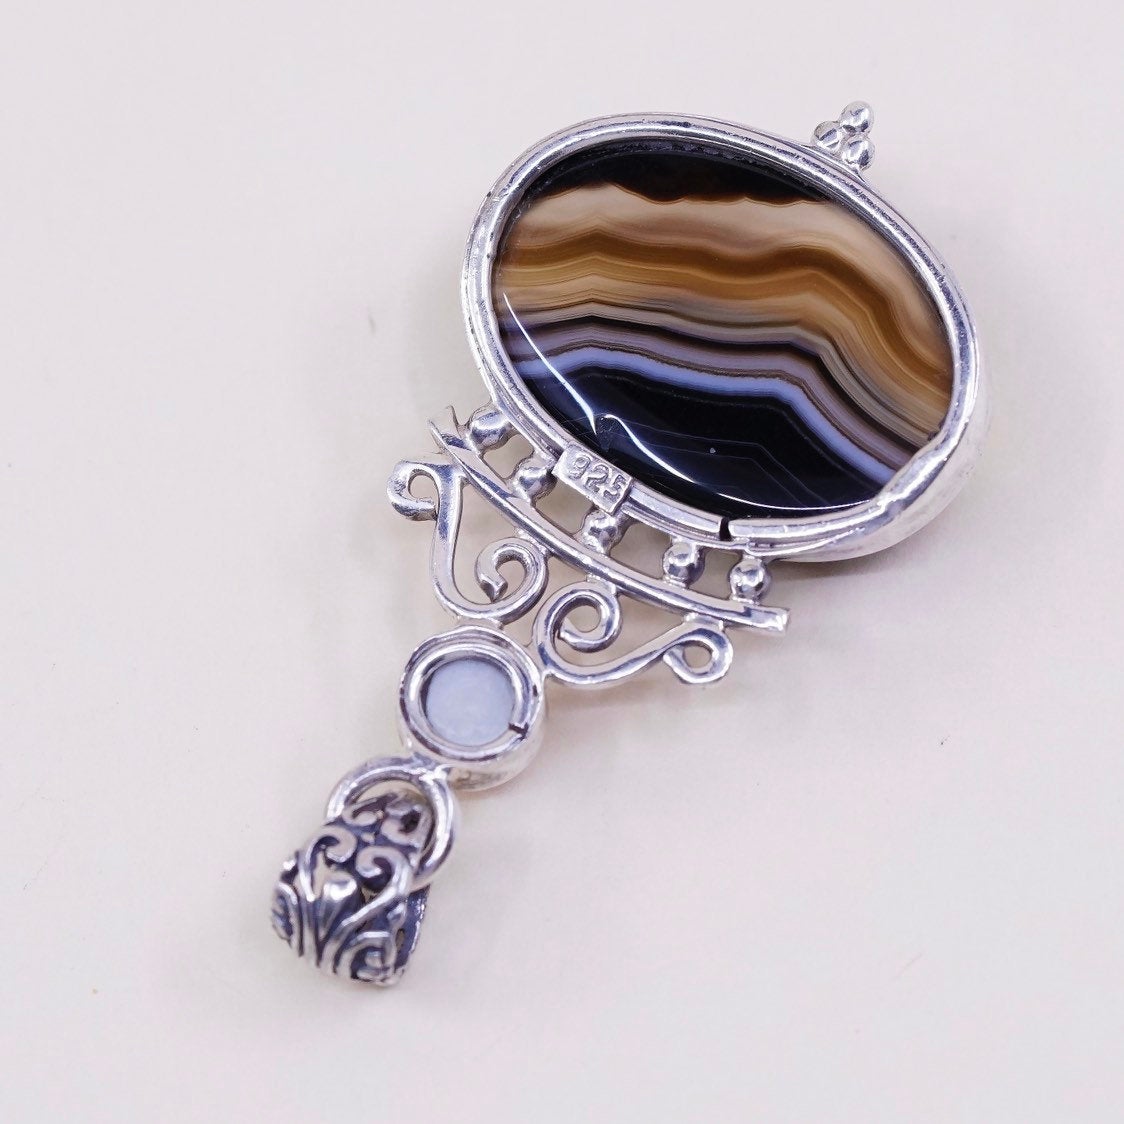 vtg sterling silver handmade pendant, solid 925 with agate and pearl